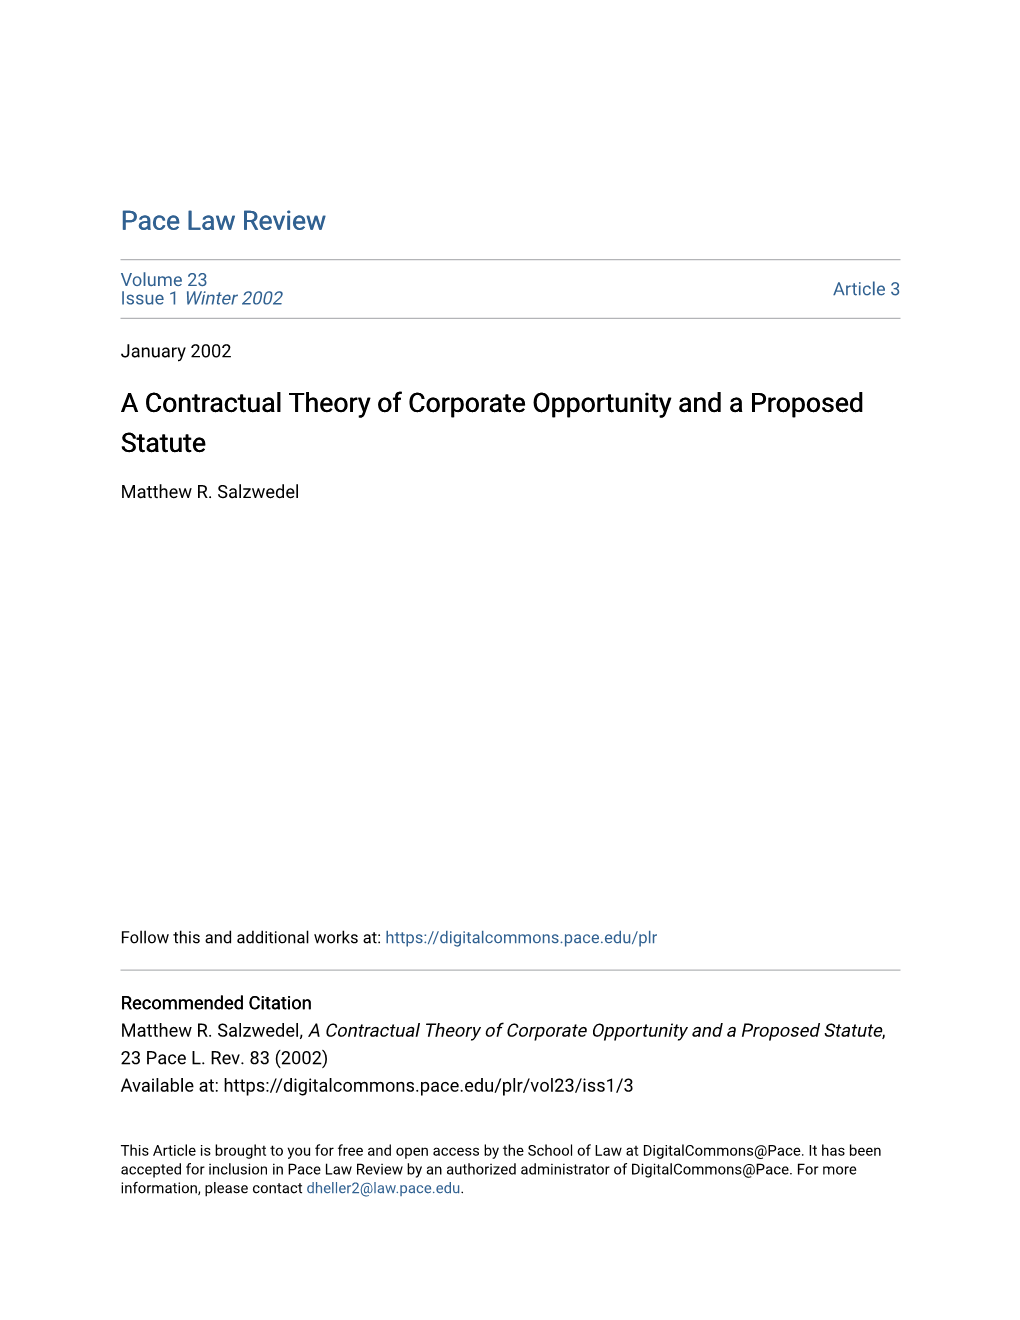 A Contractual Theory of Corporate Opportunity and a Proposed Statute